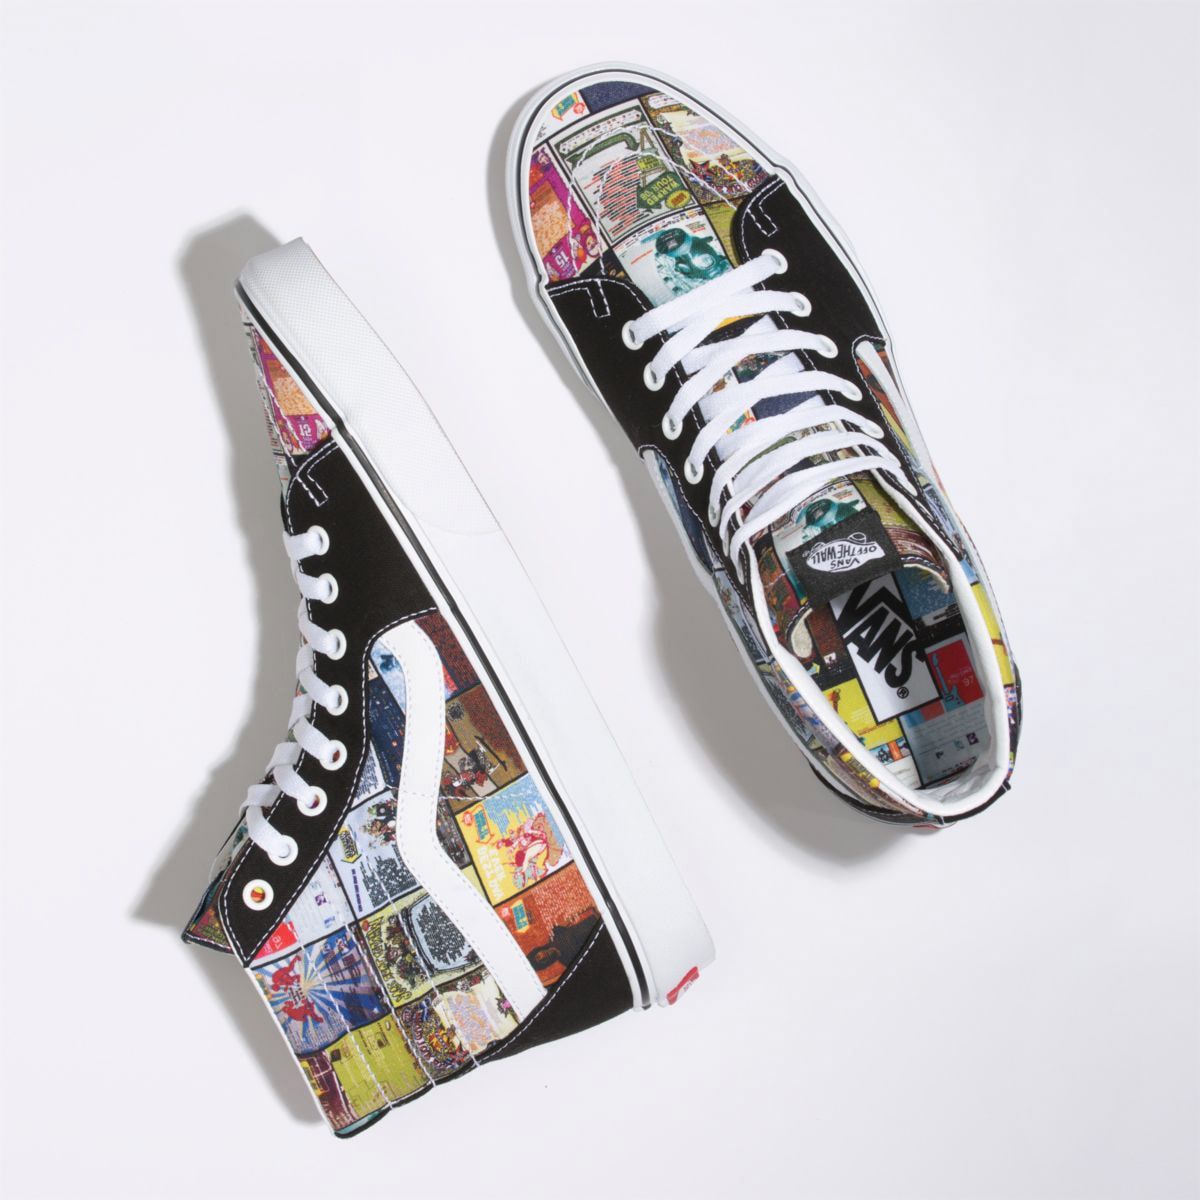 Vans Celebrate 25 Years of the Warped Tour with Tour Poster-Covered Sk8 ...